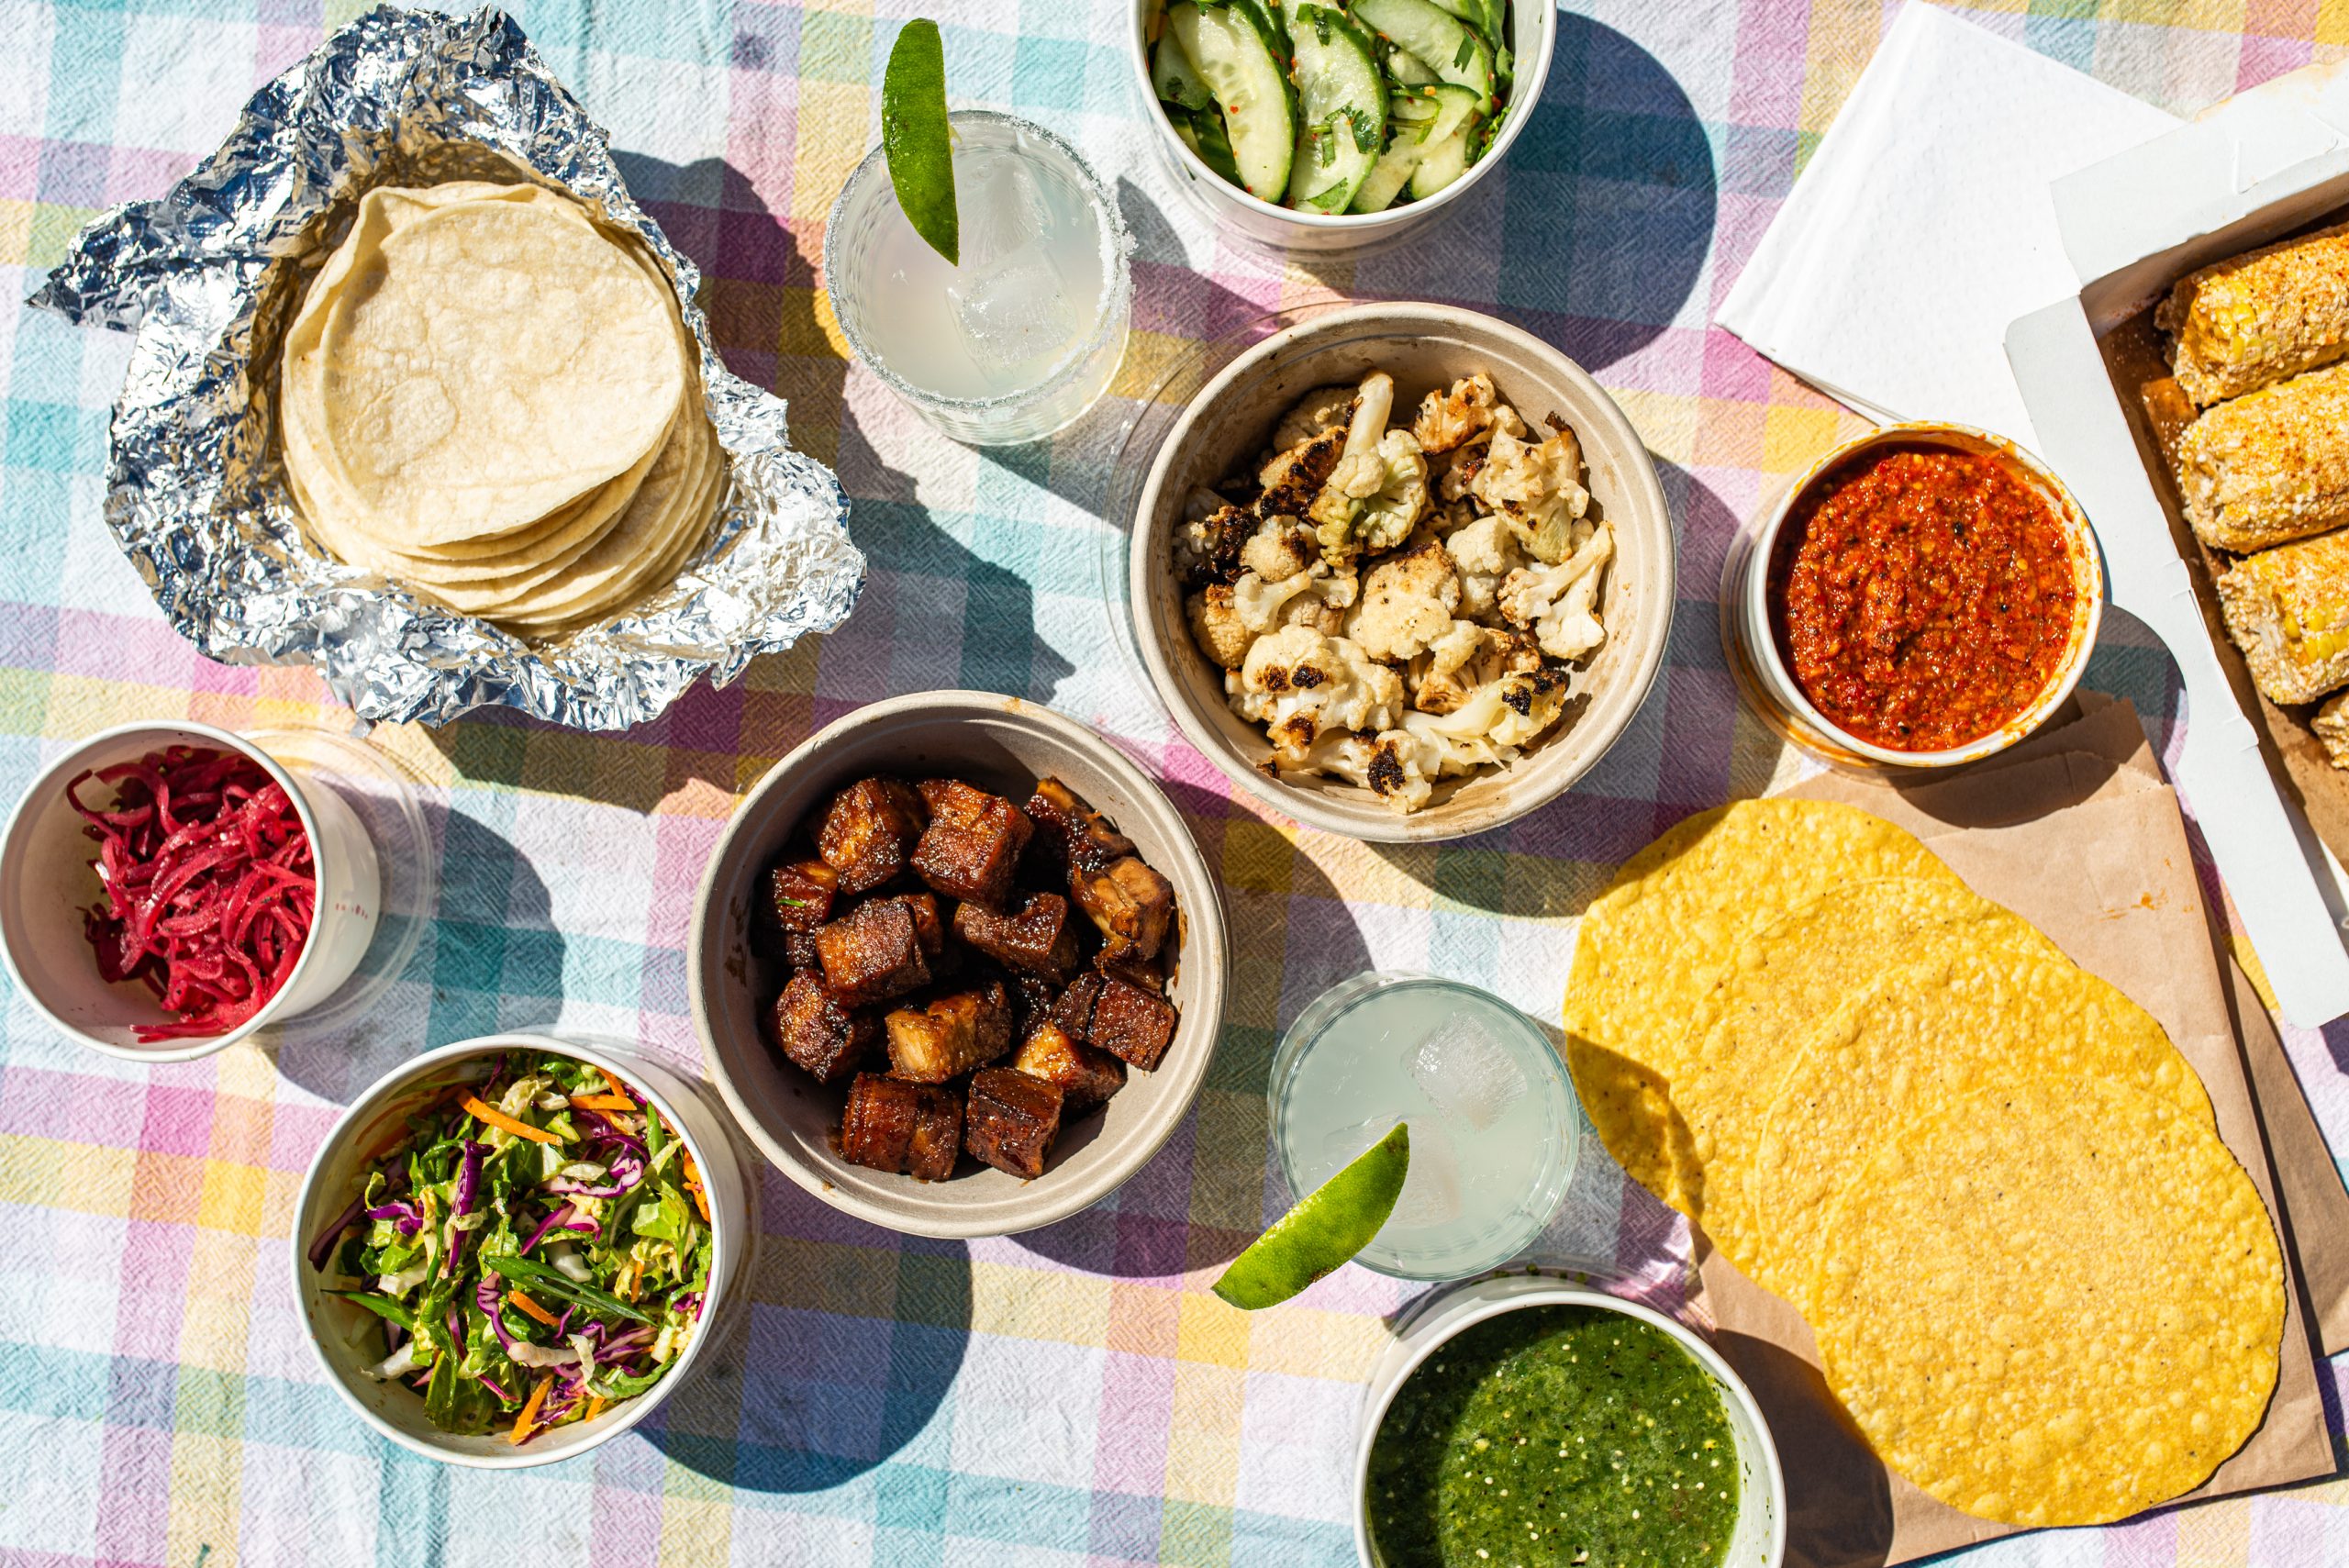 feed the whole gang with a family pack. choose from our taco pack or our roasted chicken pack, both served with salsa verde + chips and your choice of 3 sides. $49.50 per pack - feeds four order online in just a few clicks at order.bartaco.com.